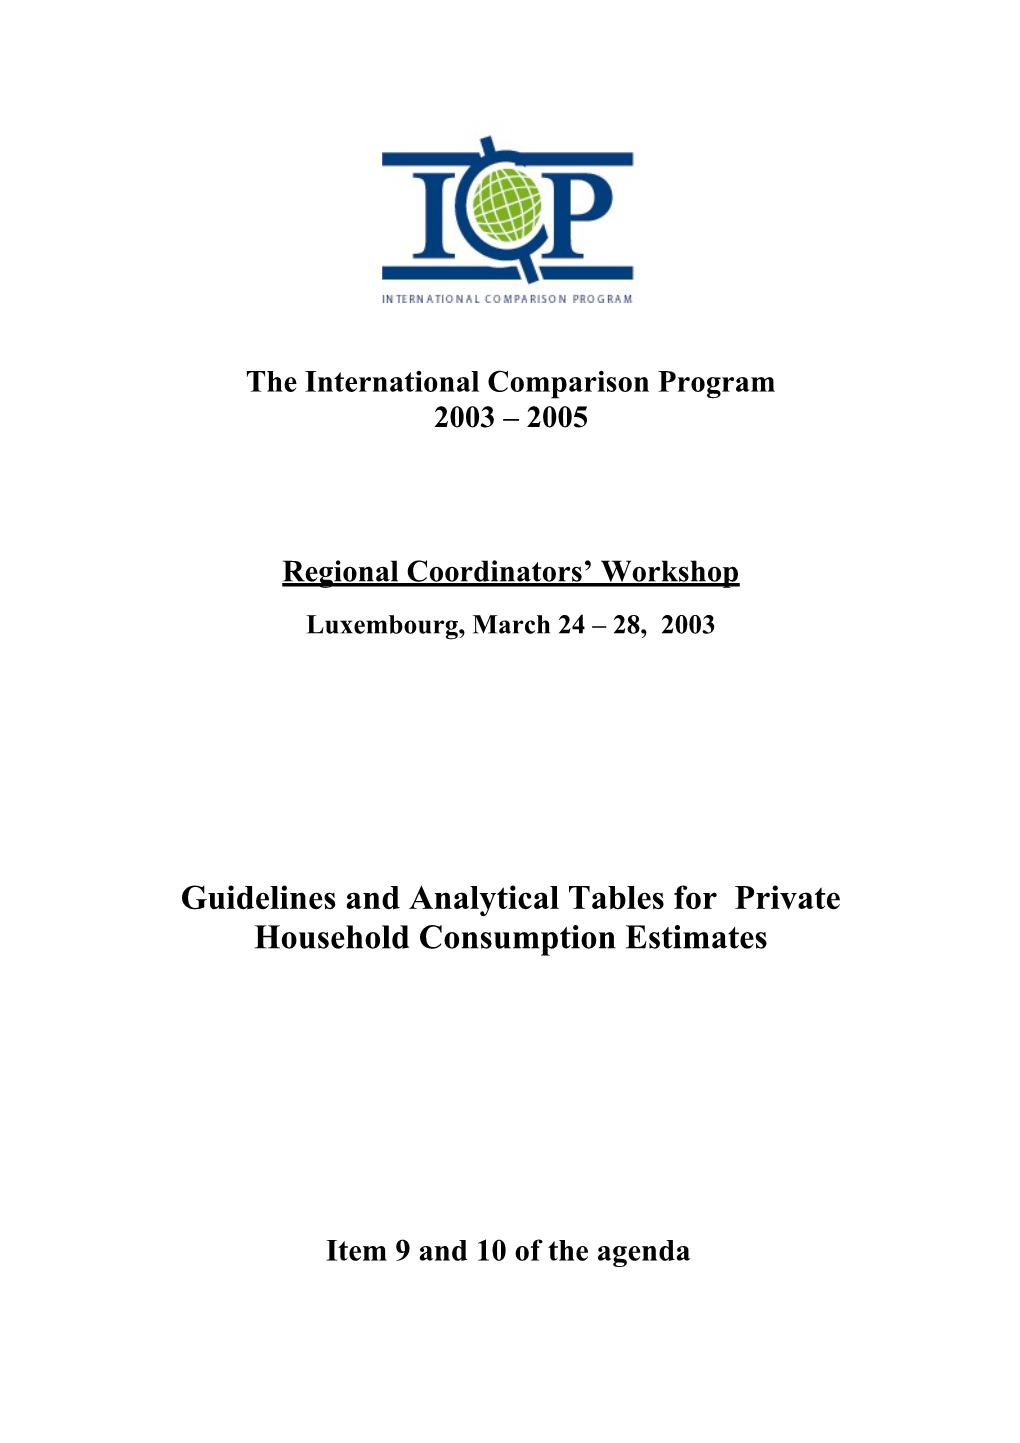 Guidelines and Analytical Tables for Private Household Consumption Estimates